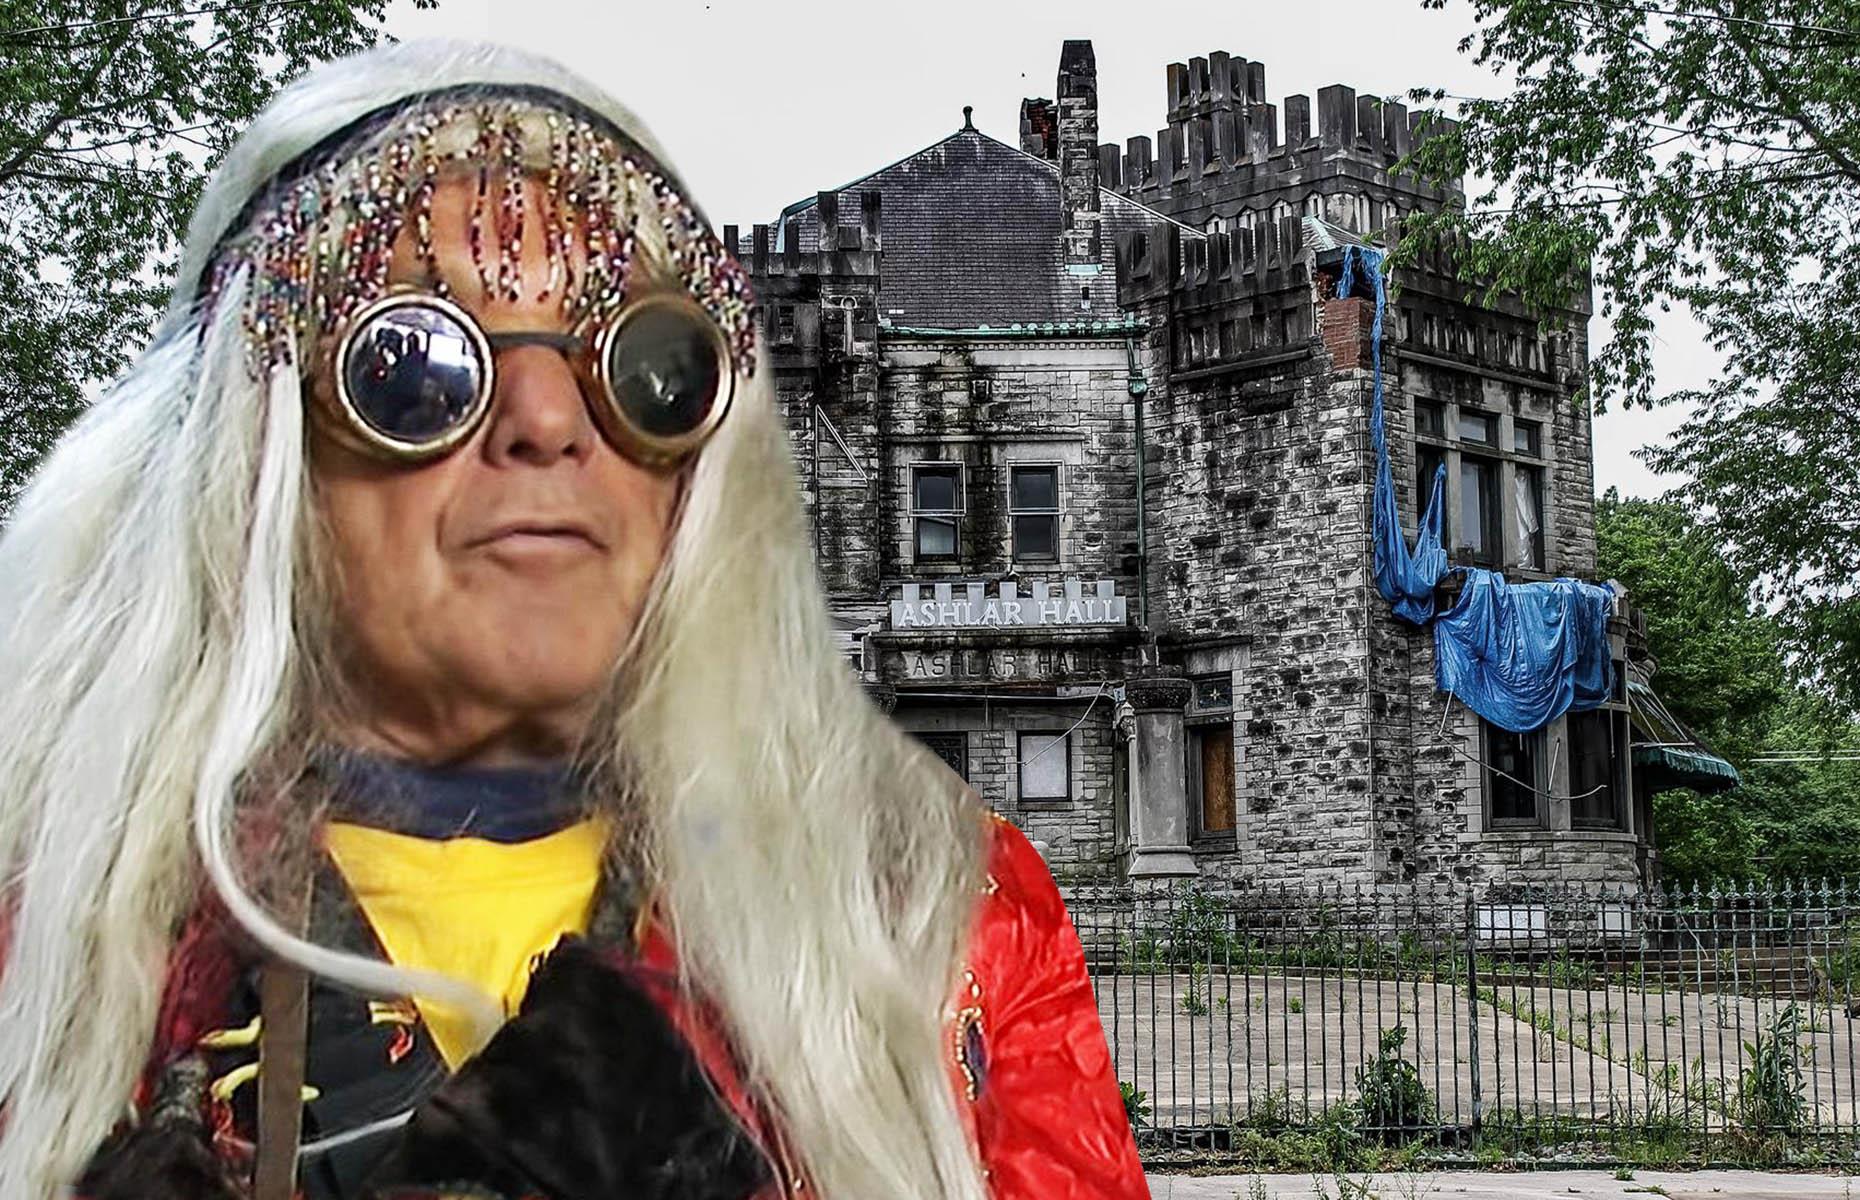 Inside a regal American castle, abandoned by an eccentric millionaire